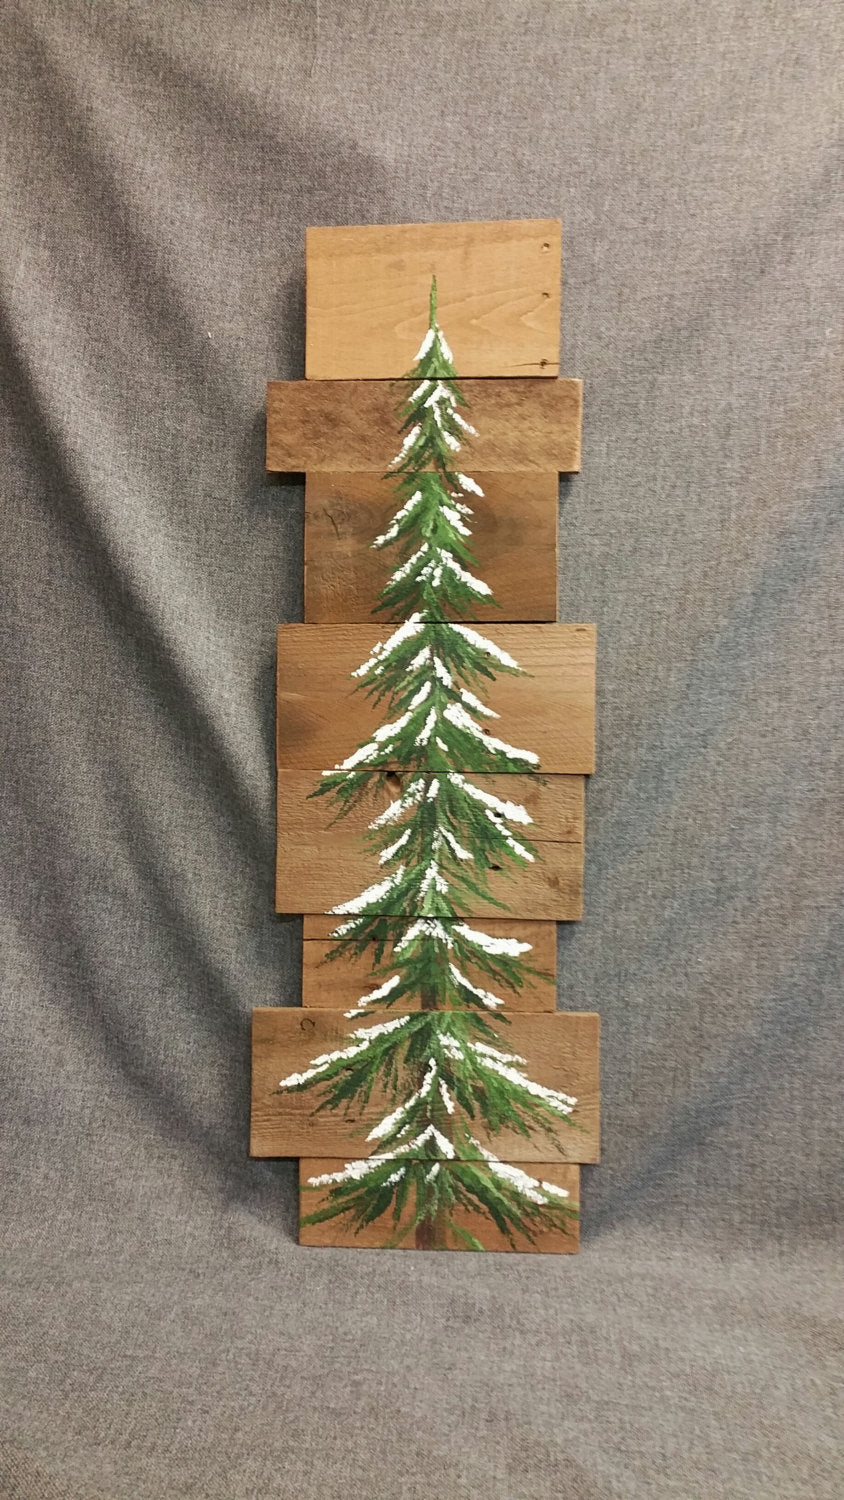 Hand Painted Pine tree on pallet wood, Winter cottage decor, Farmhouse style Evergreen, Christmas tree